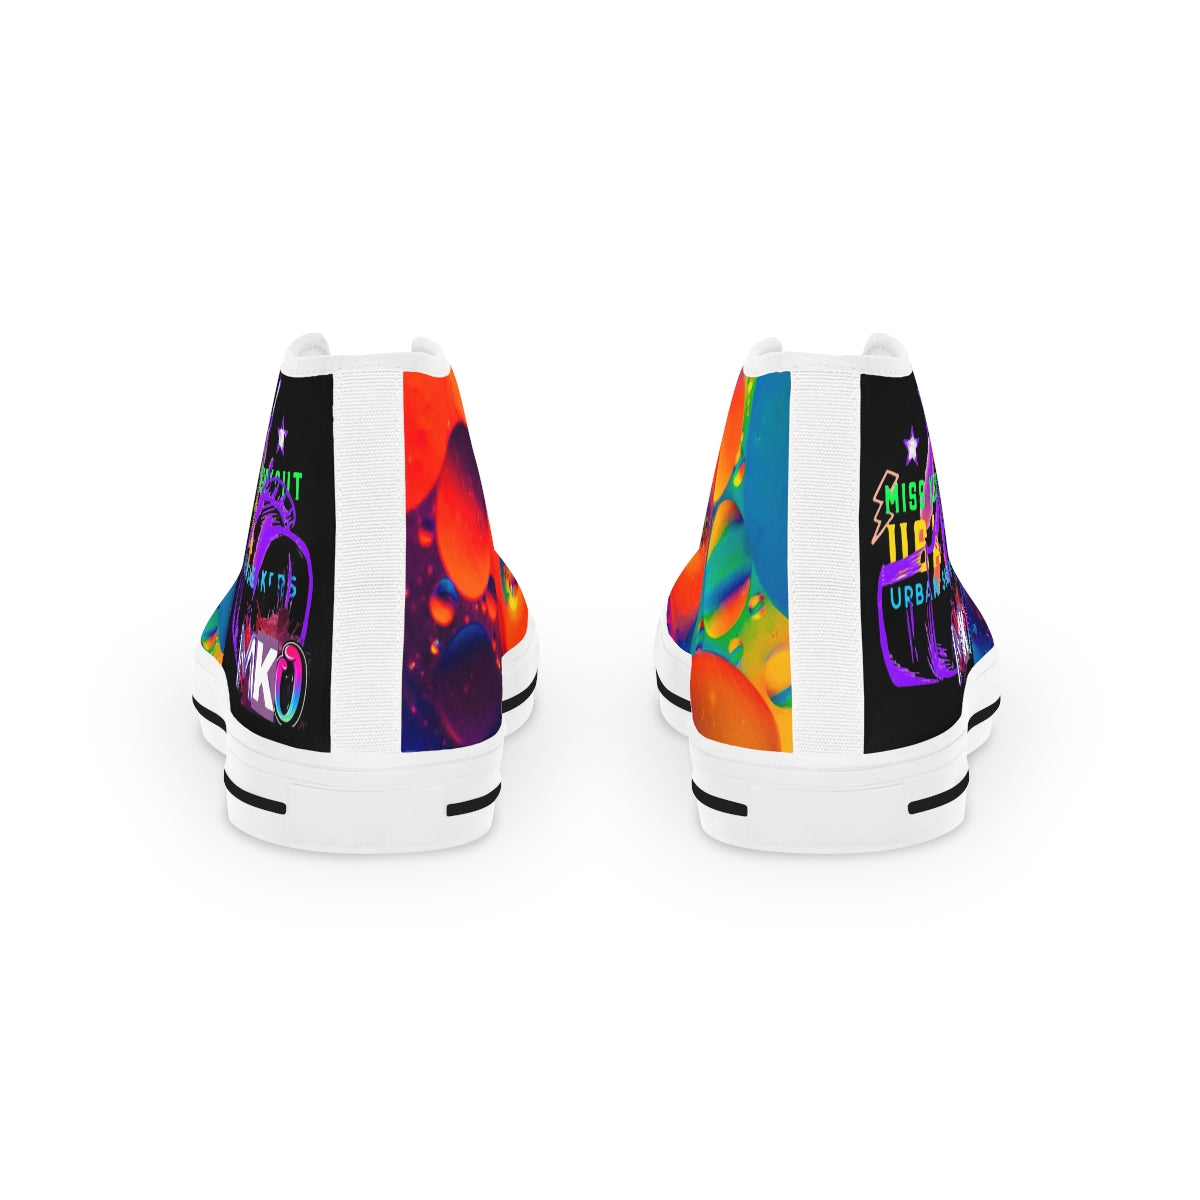 colorful Men's High Top Sneakers  Miss knockout ™ Merchandise